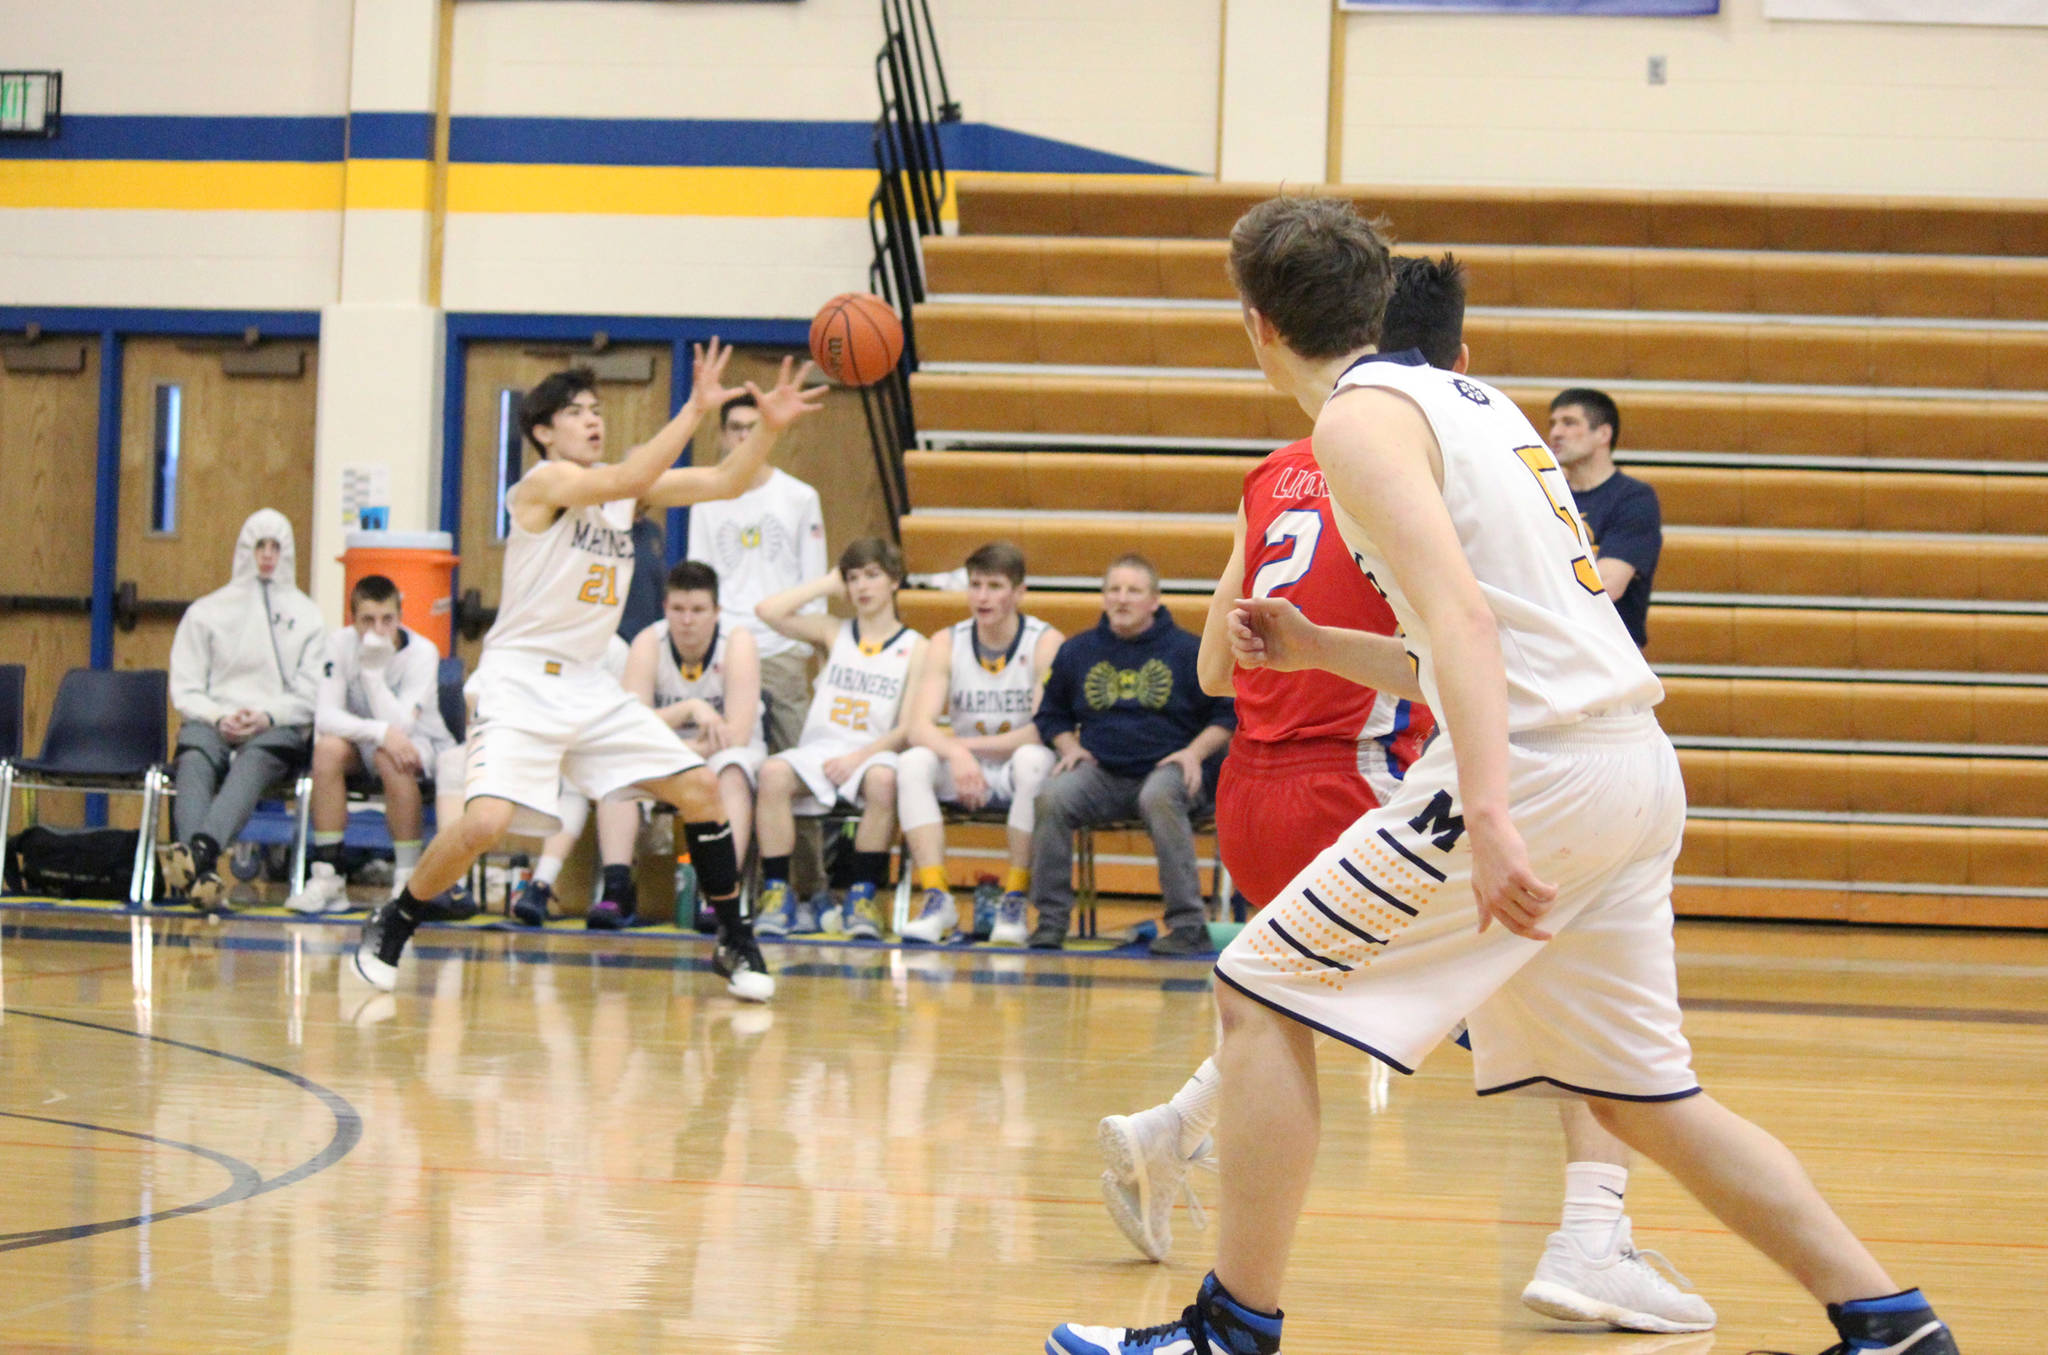 Homer senior Koby Etzwiler (foreground) completes a pass to sophomore Ethan Anderson during their game against Anchorage Christian School on Saturday, Feb. 24, 2018 in the Alice Witte Gymnasium in Homer, Alaska. The Homer basketball teams hosted three schools over the weekend, all at home. (Photo by Megan Pacer/Homer News)